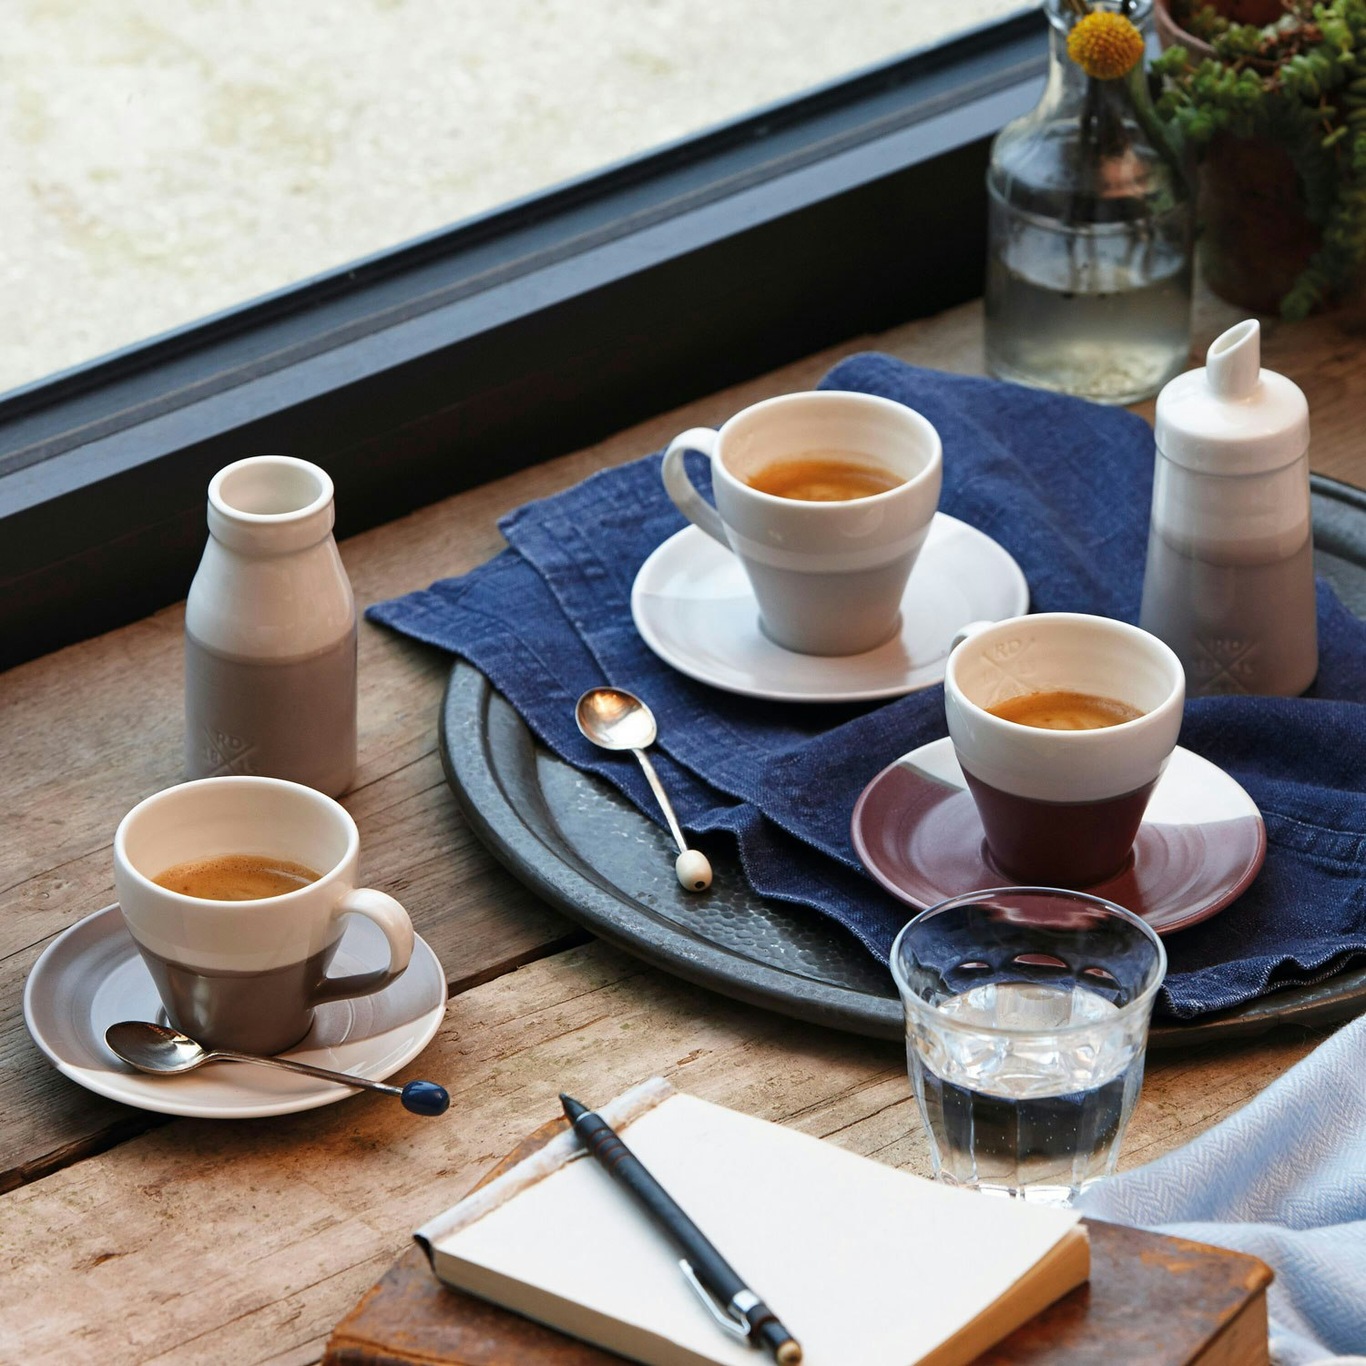 https://royaldesign.com/image/2/royal-doulton-coffee-studio-espresso-cups-and-saucers-4-pack-1?w=800&quality=80